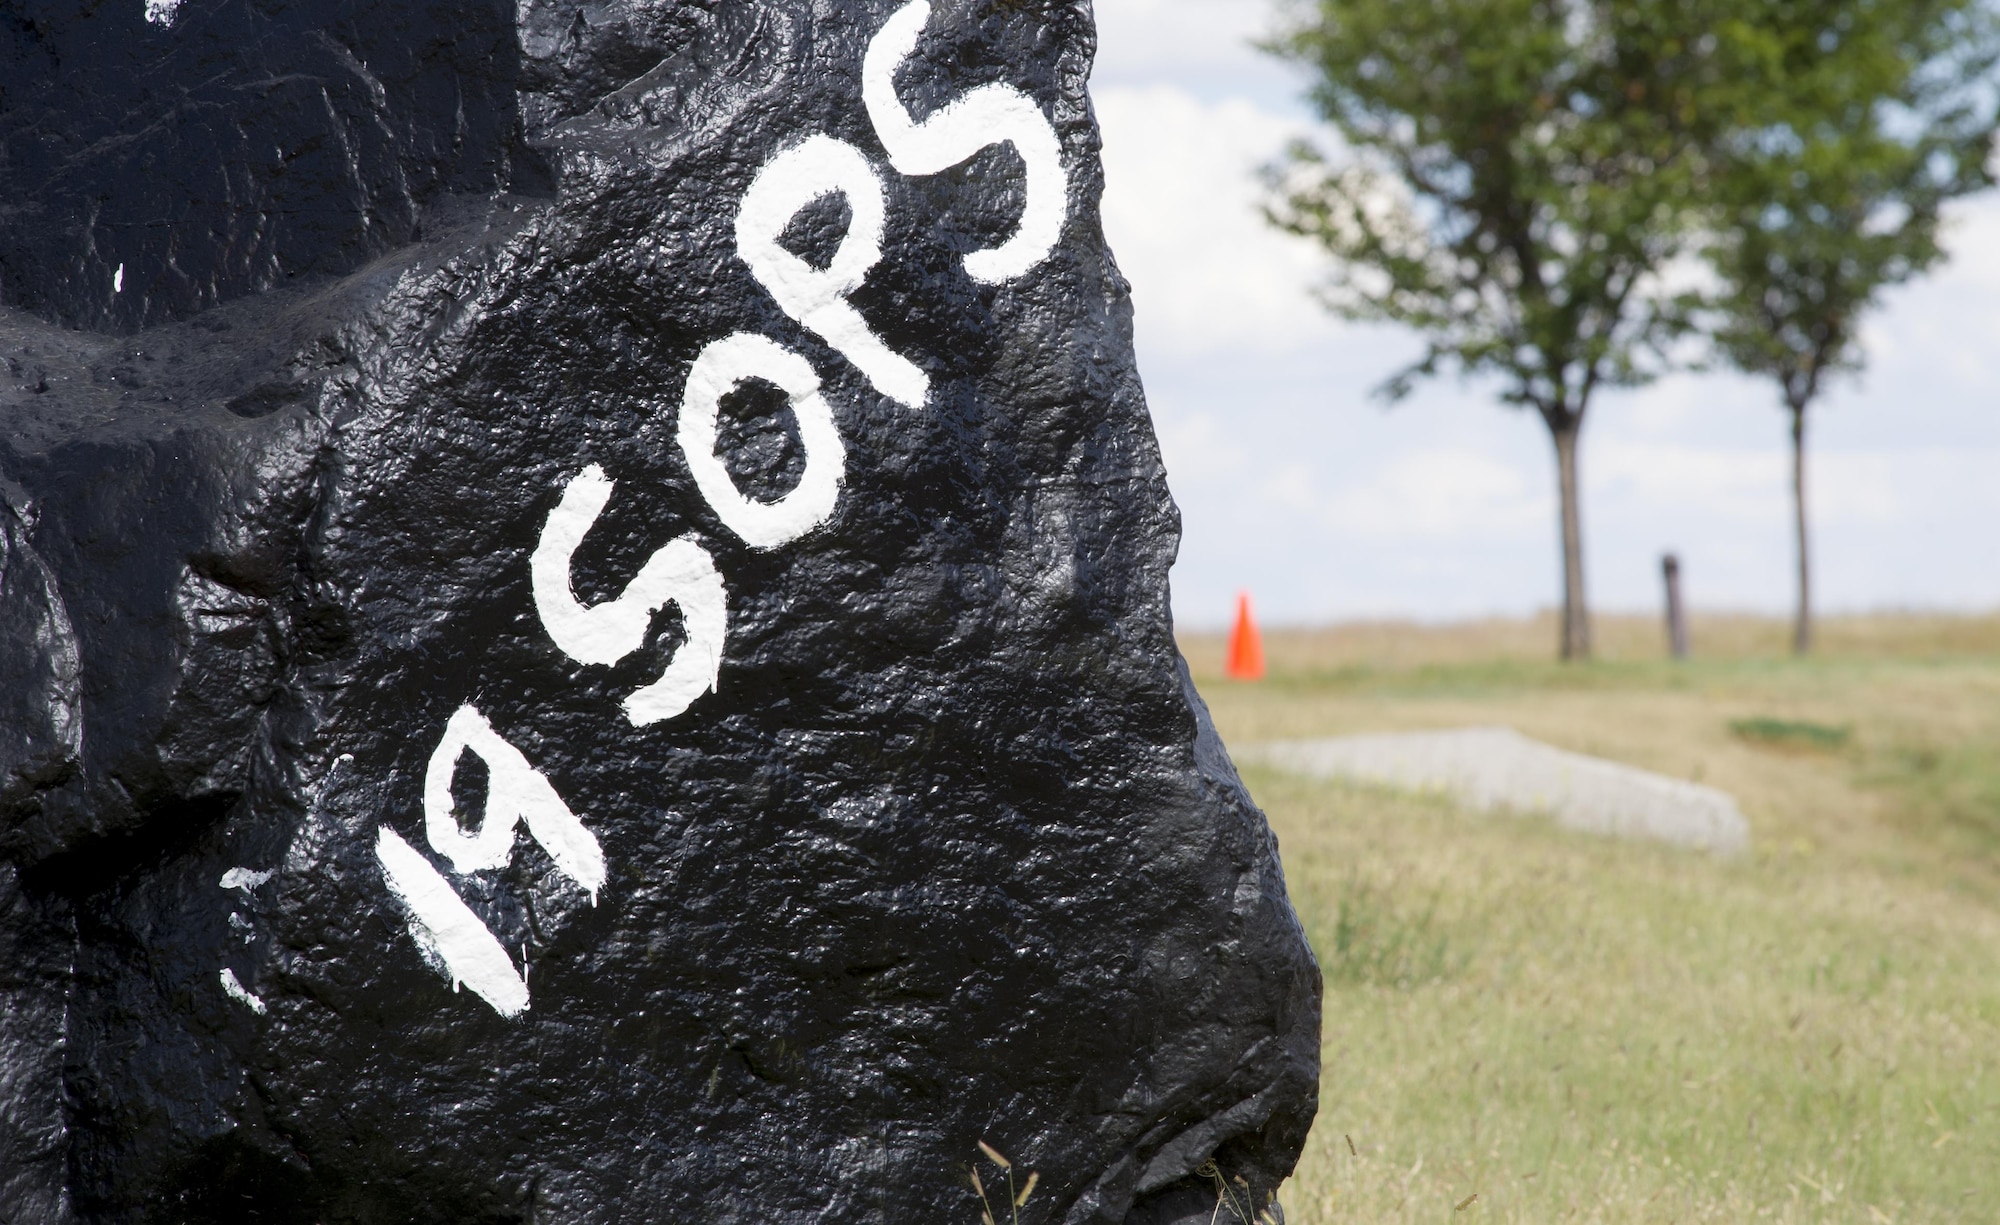 Reserve Citizen Airmen from the 19th Space Operations Squadron gave Schriever's Spirit Rock a fresh coat of paint, shown here on Thursday, Sep. 14, 2017.